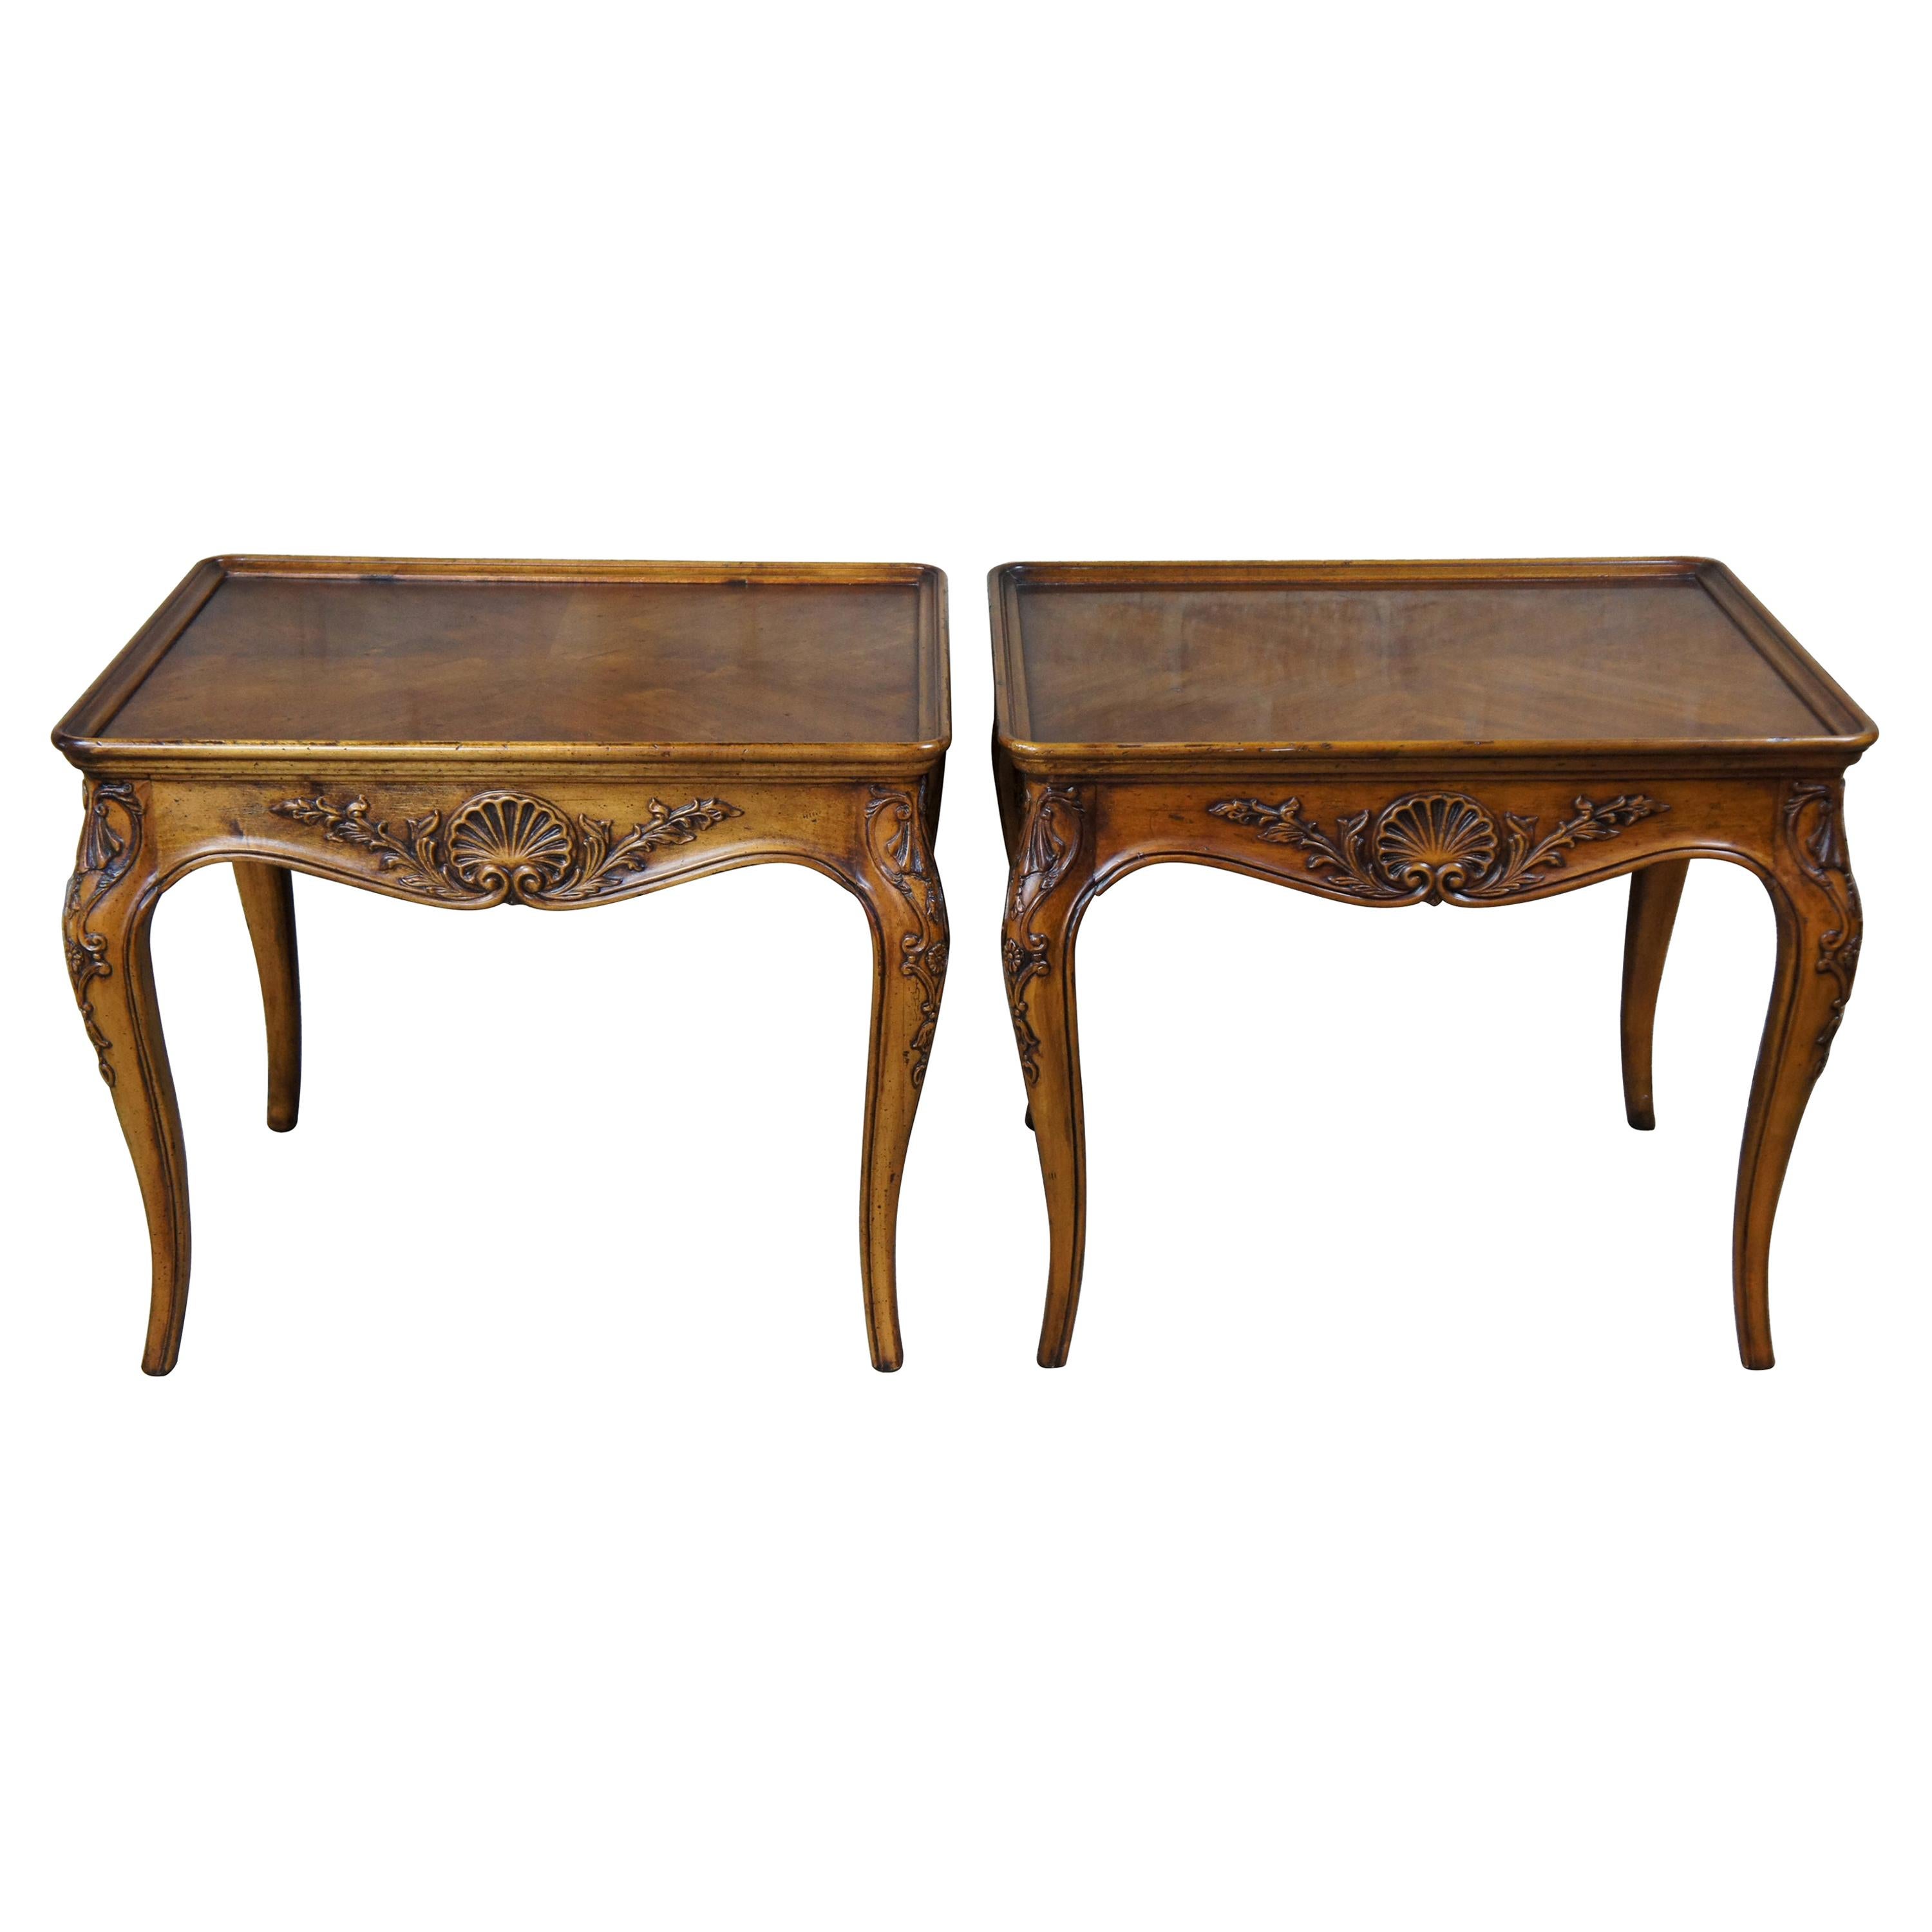 2 1987 Henredon Country French Rectangular Walnut Side Accent Tables 3201-41